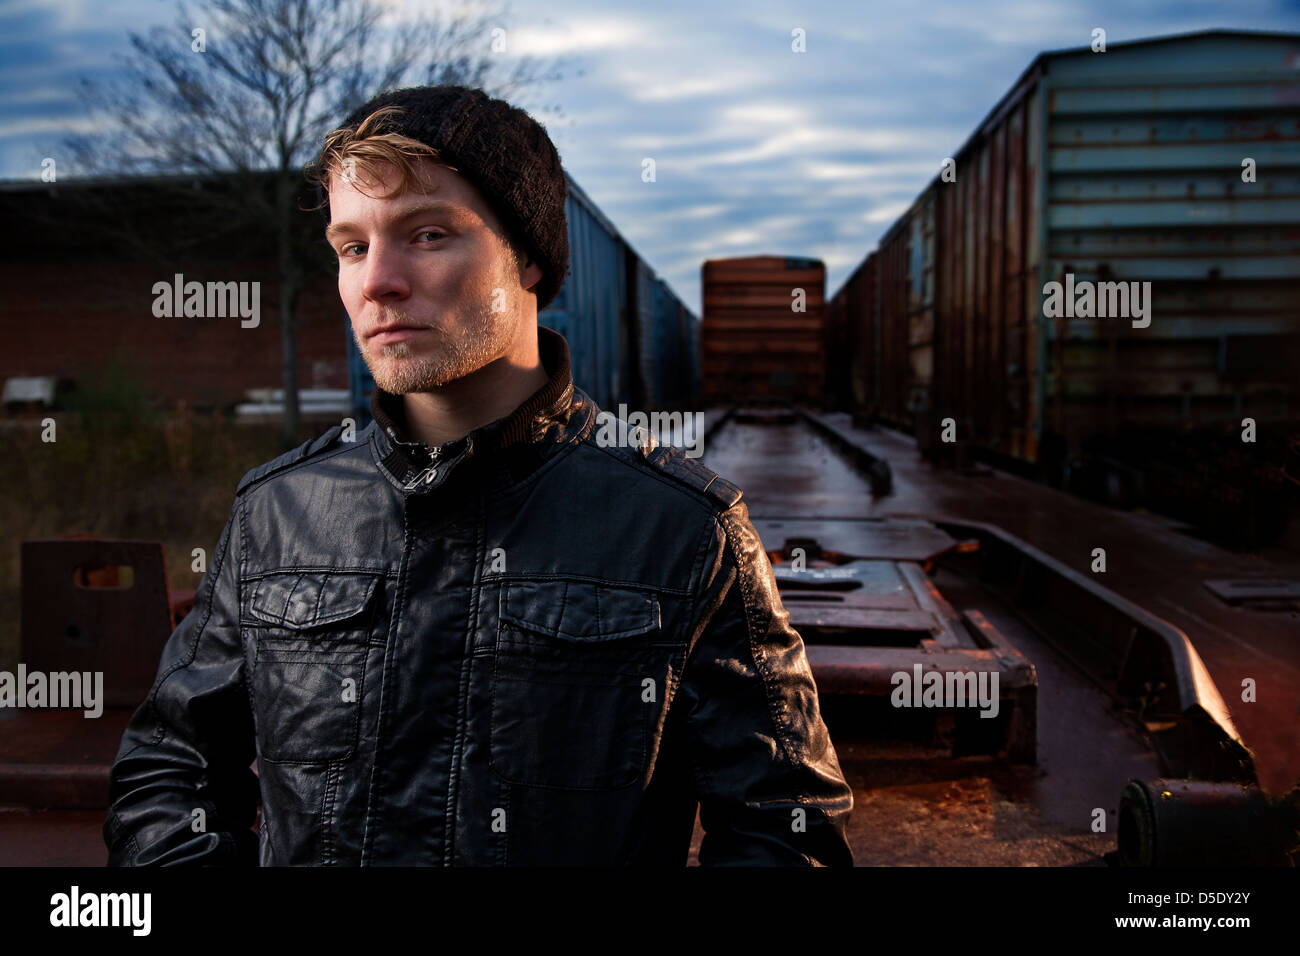 Man in cap and jacket in rail road yard Stock Photo